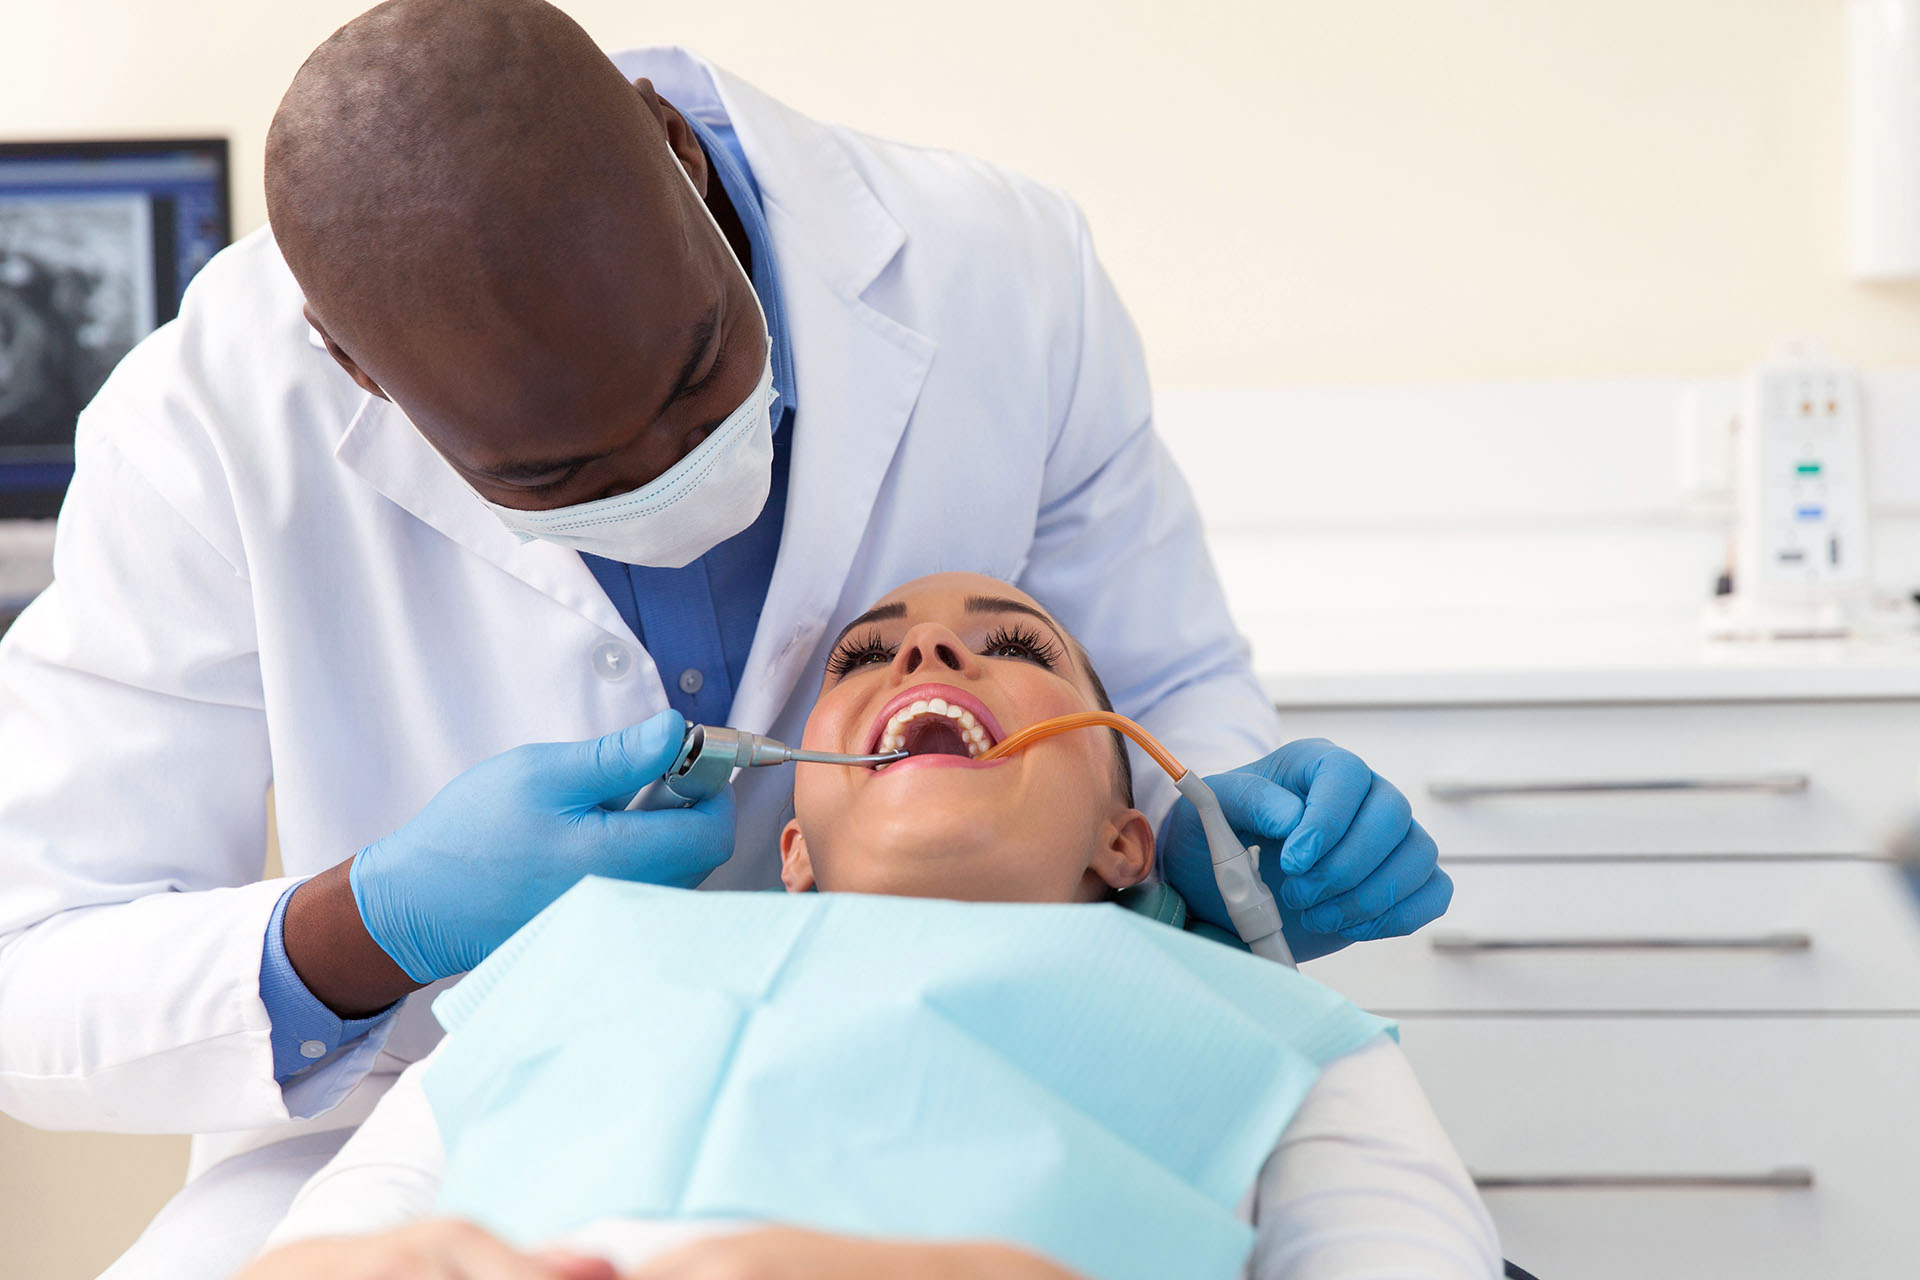 patient having her teeth cleaned by the hygienist